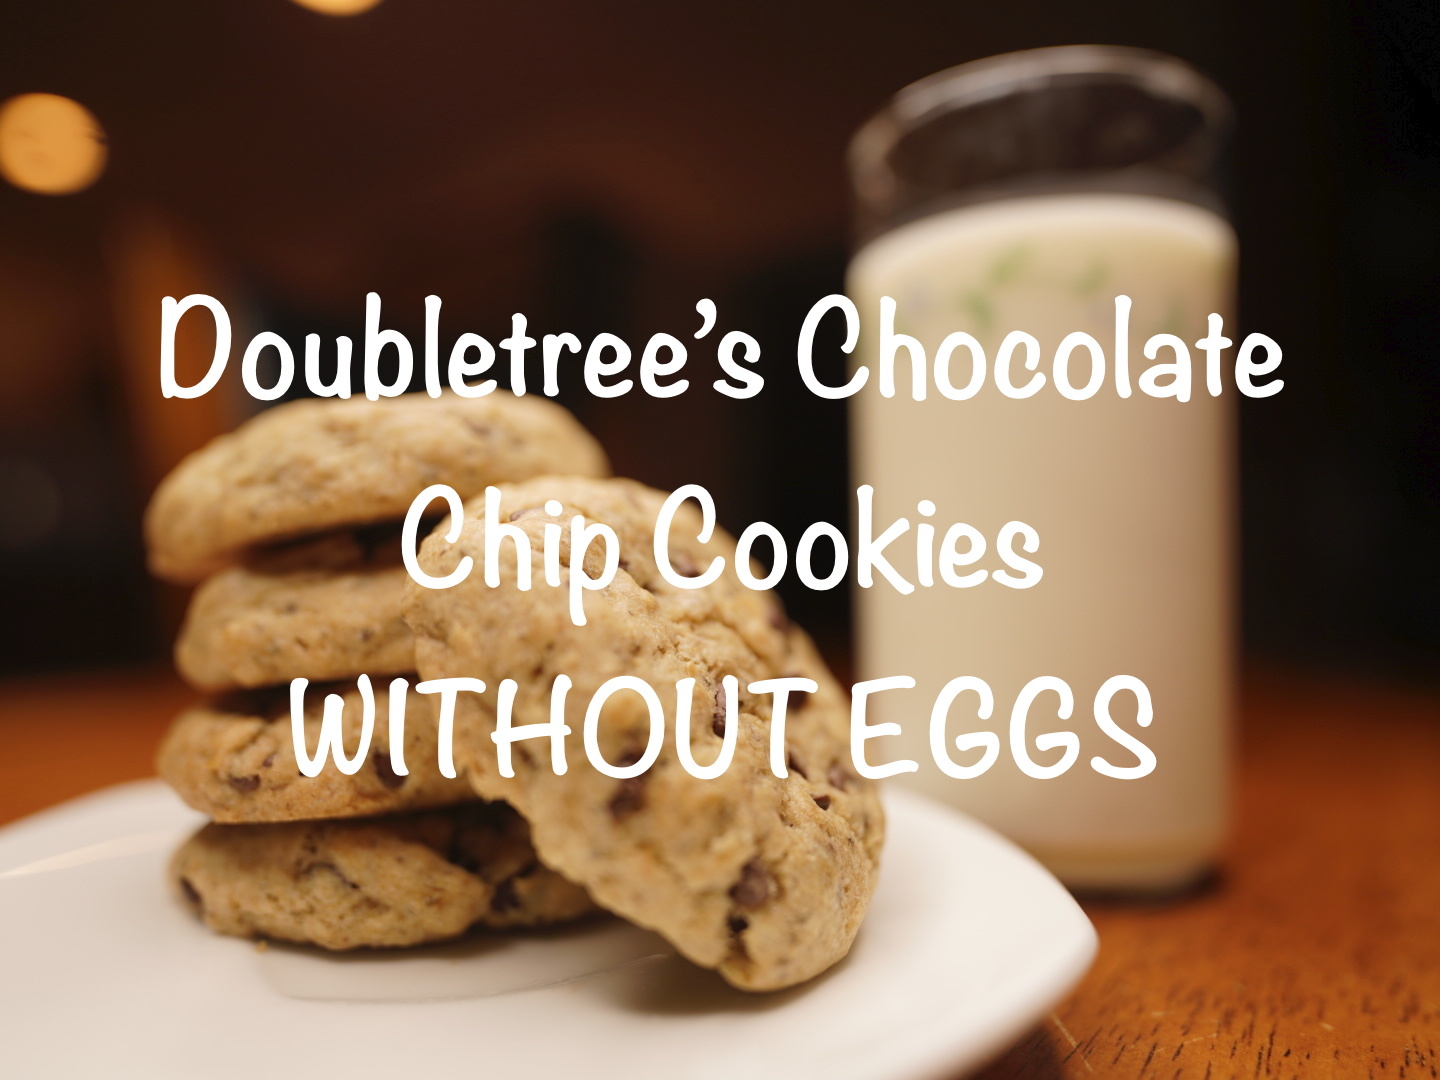 We Made Doubletree’s ‘Famous’ Chocolate Chip Cookies Eggless